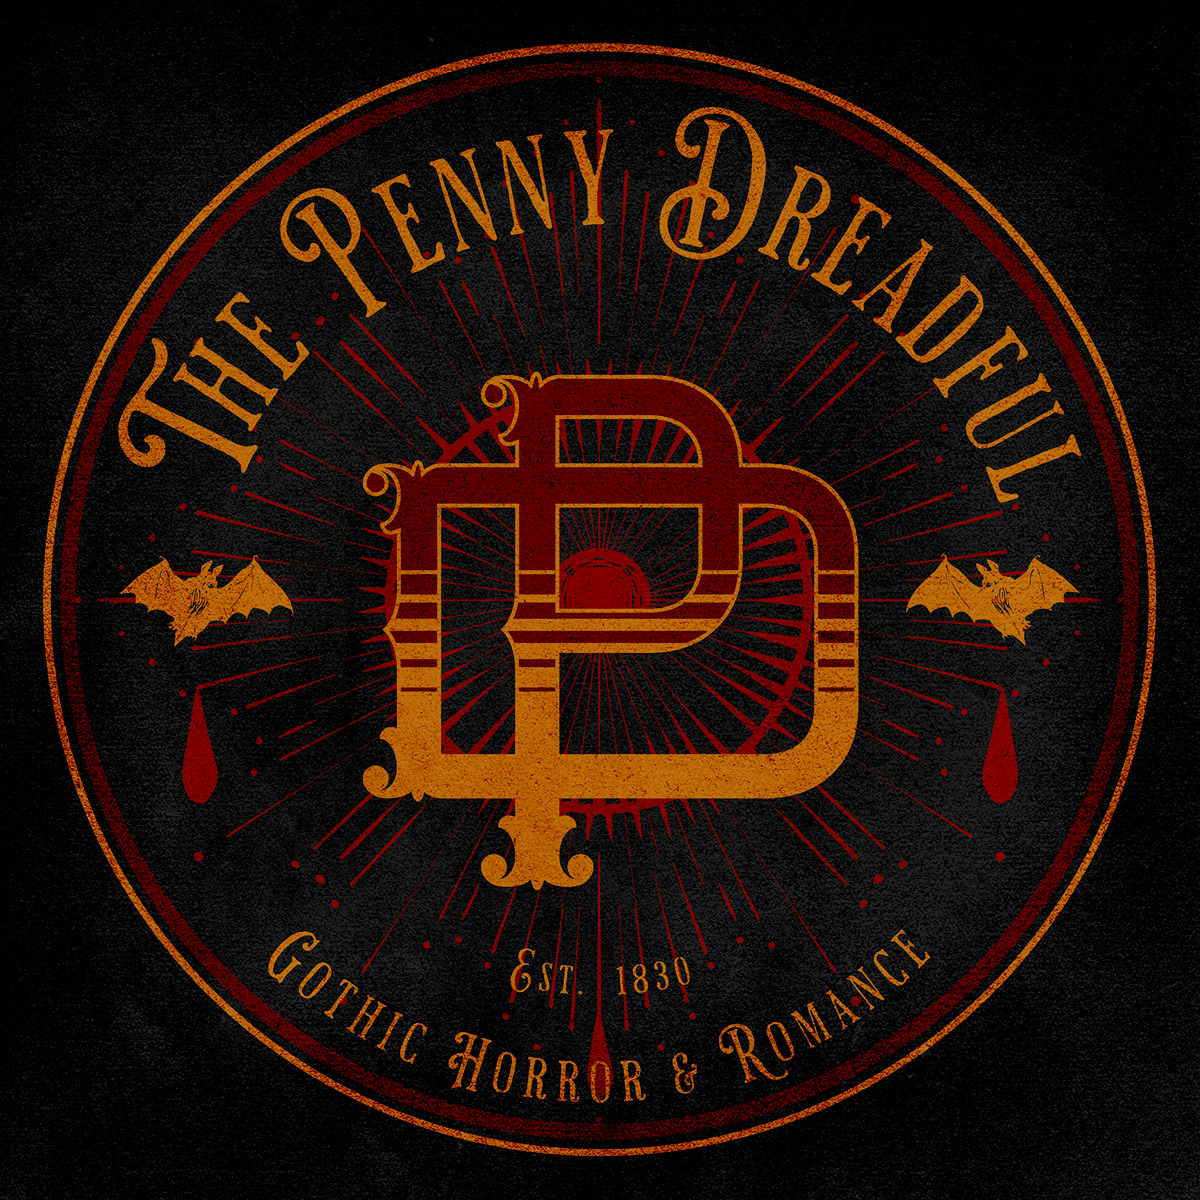 Artwork for The Penny Dreadful